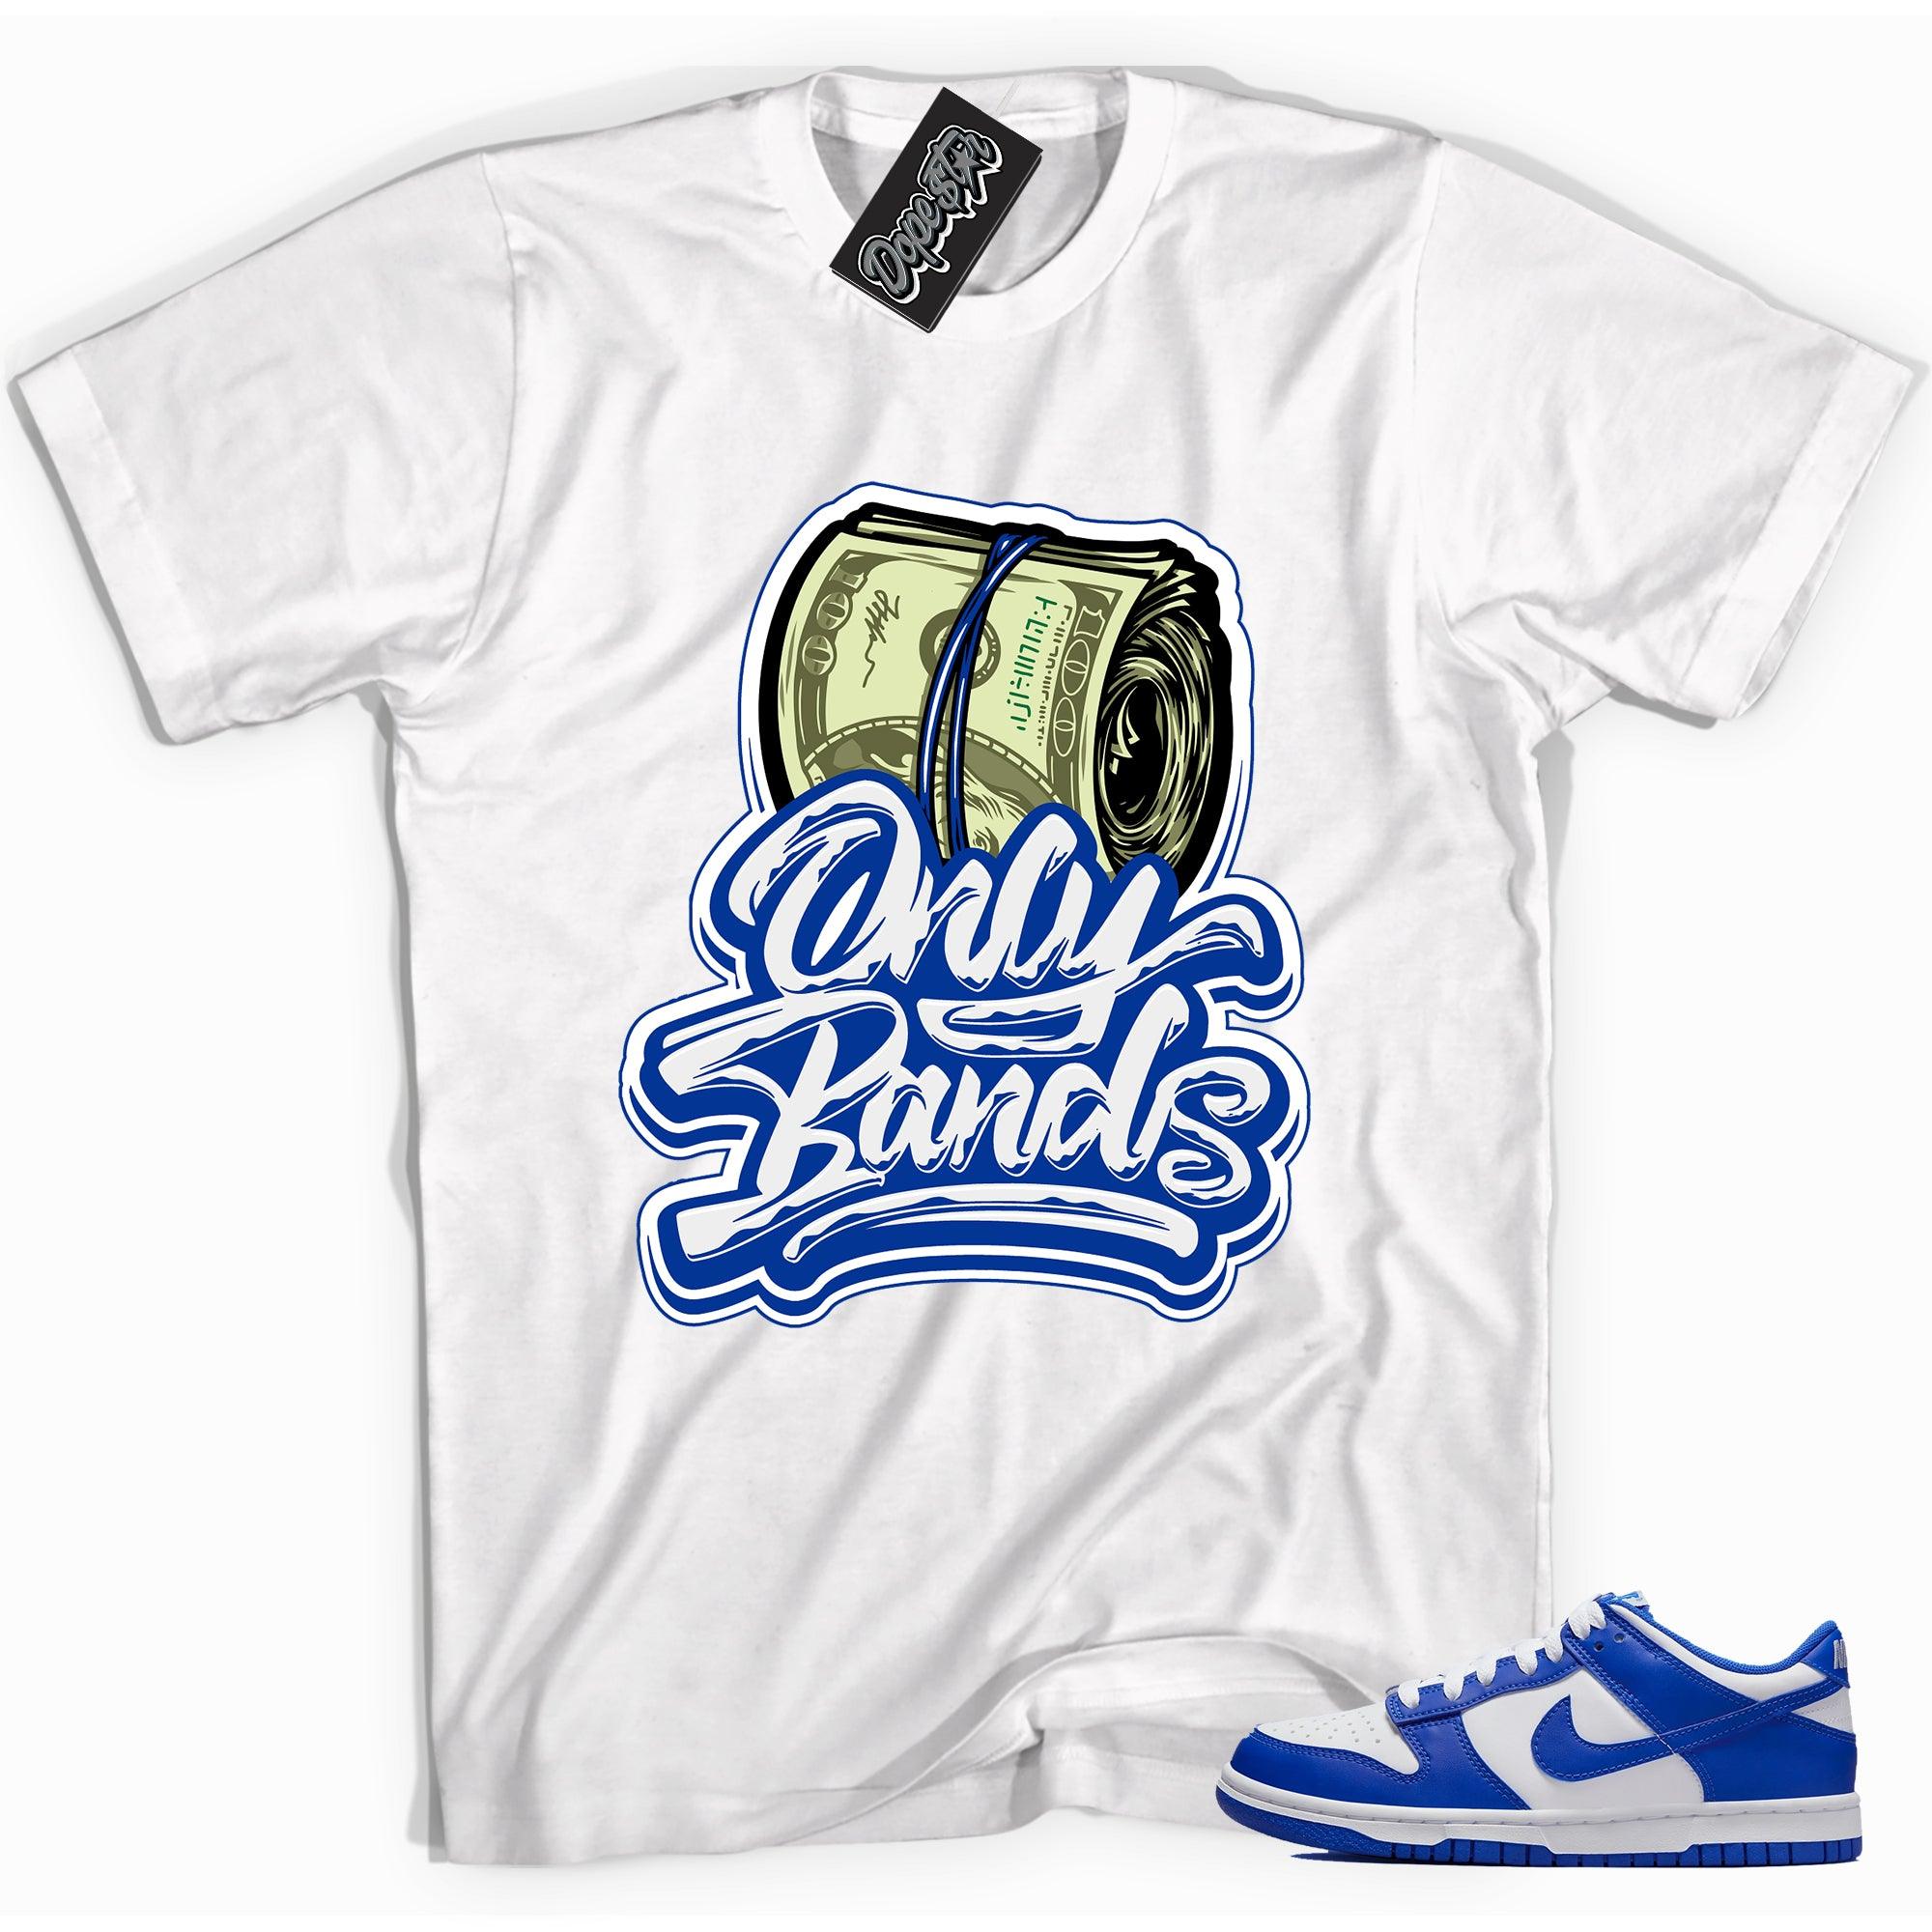 Cool white graphic tee with 'Only Bands' print, that perfectly matches Nike Dunk Low Racer Blue sneakers